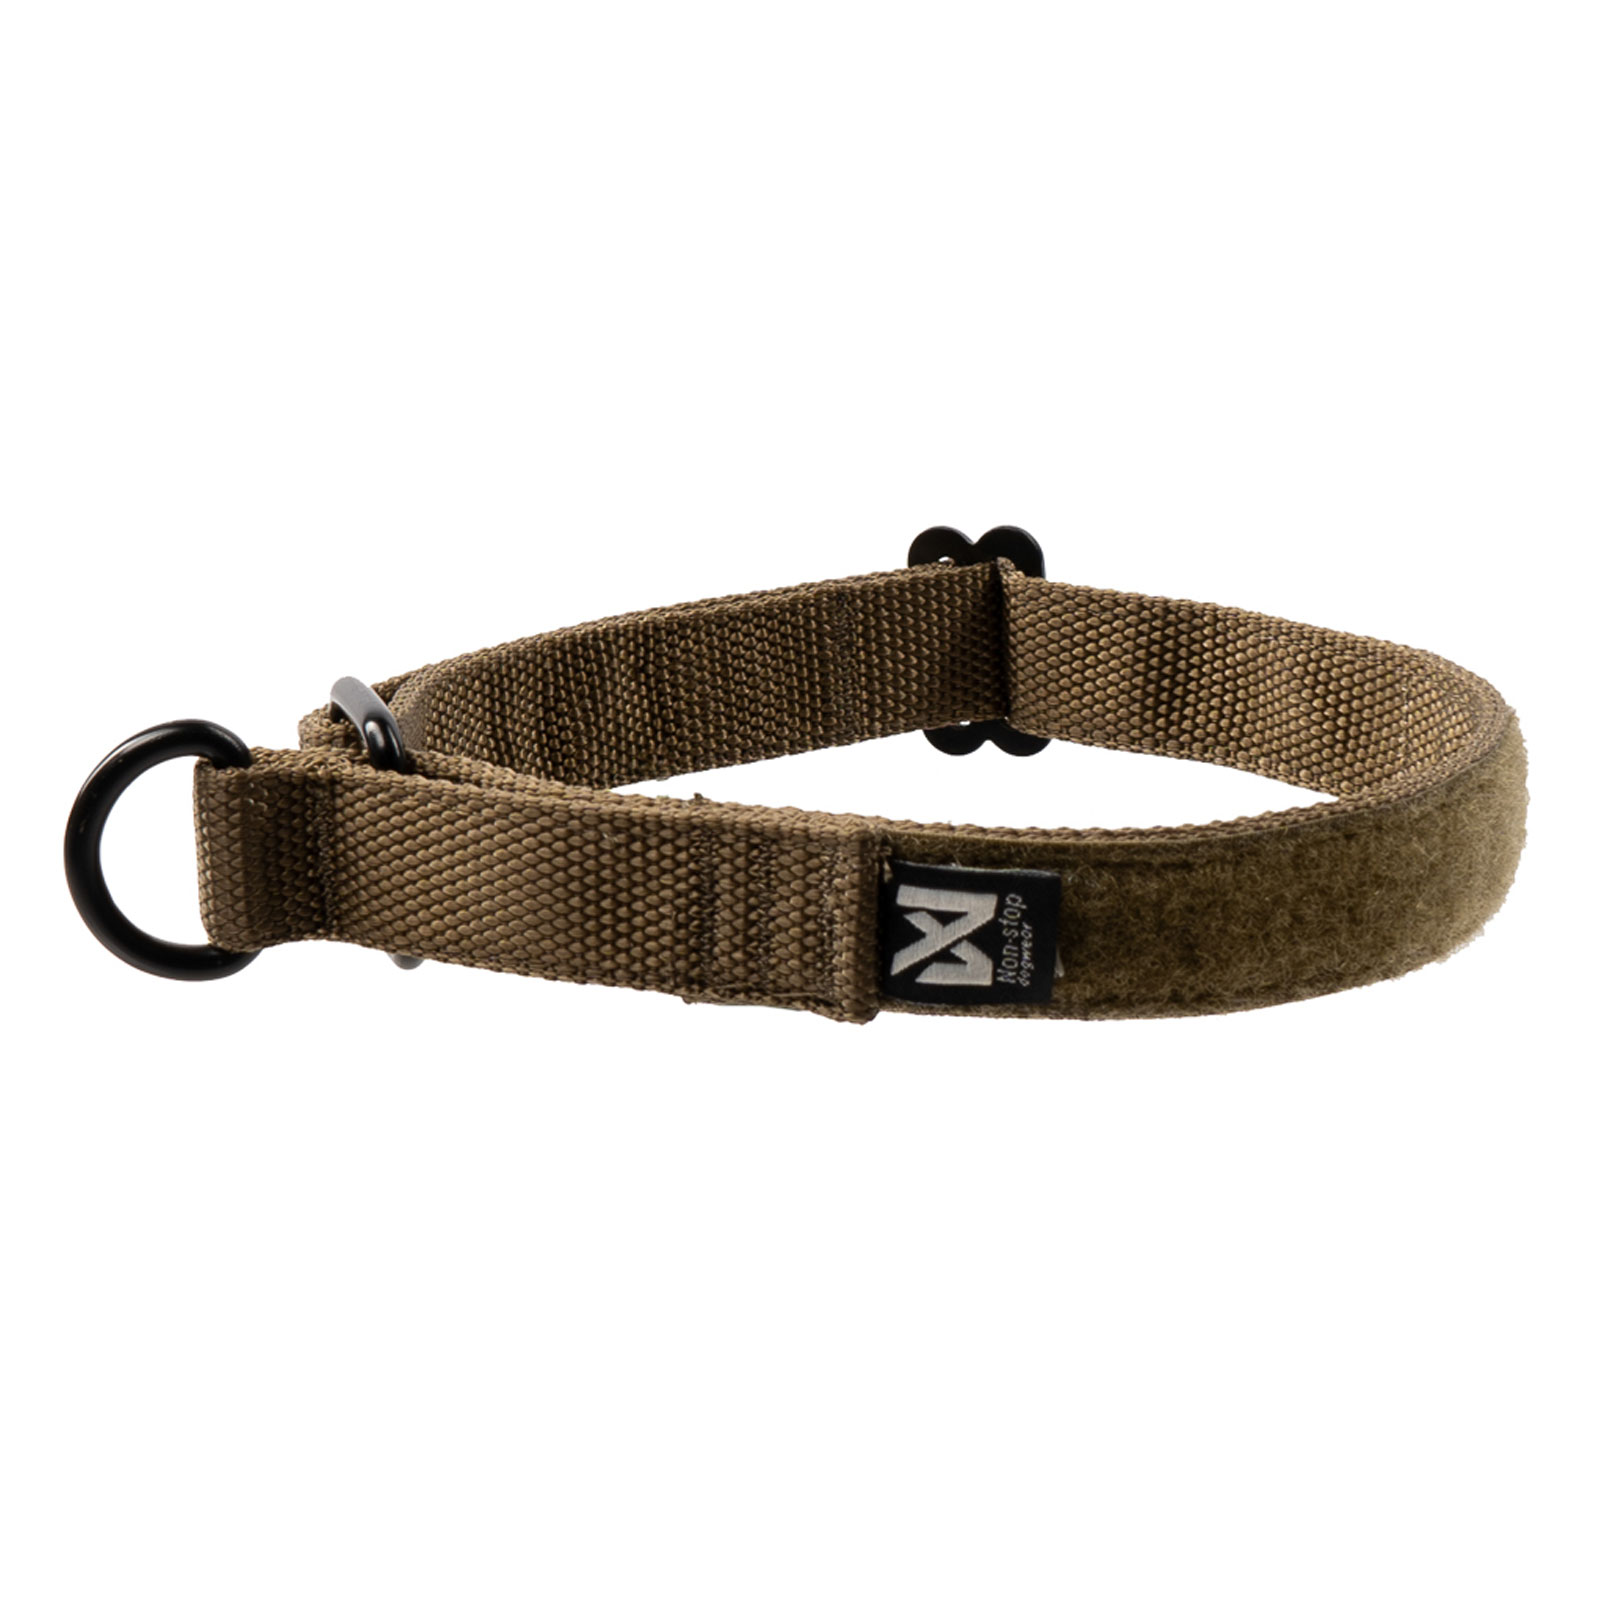 Non-stop dogwear Solid adjustable collar WD olive, one size | 4018 von Non-stop dogwear